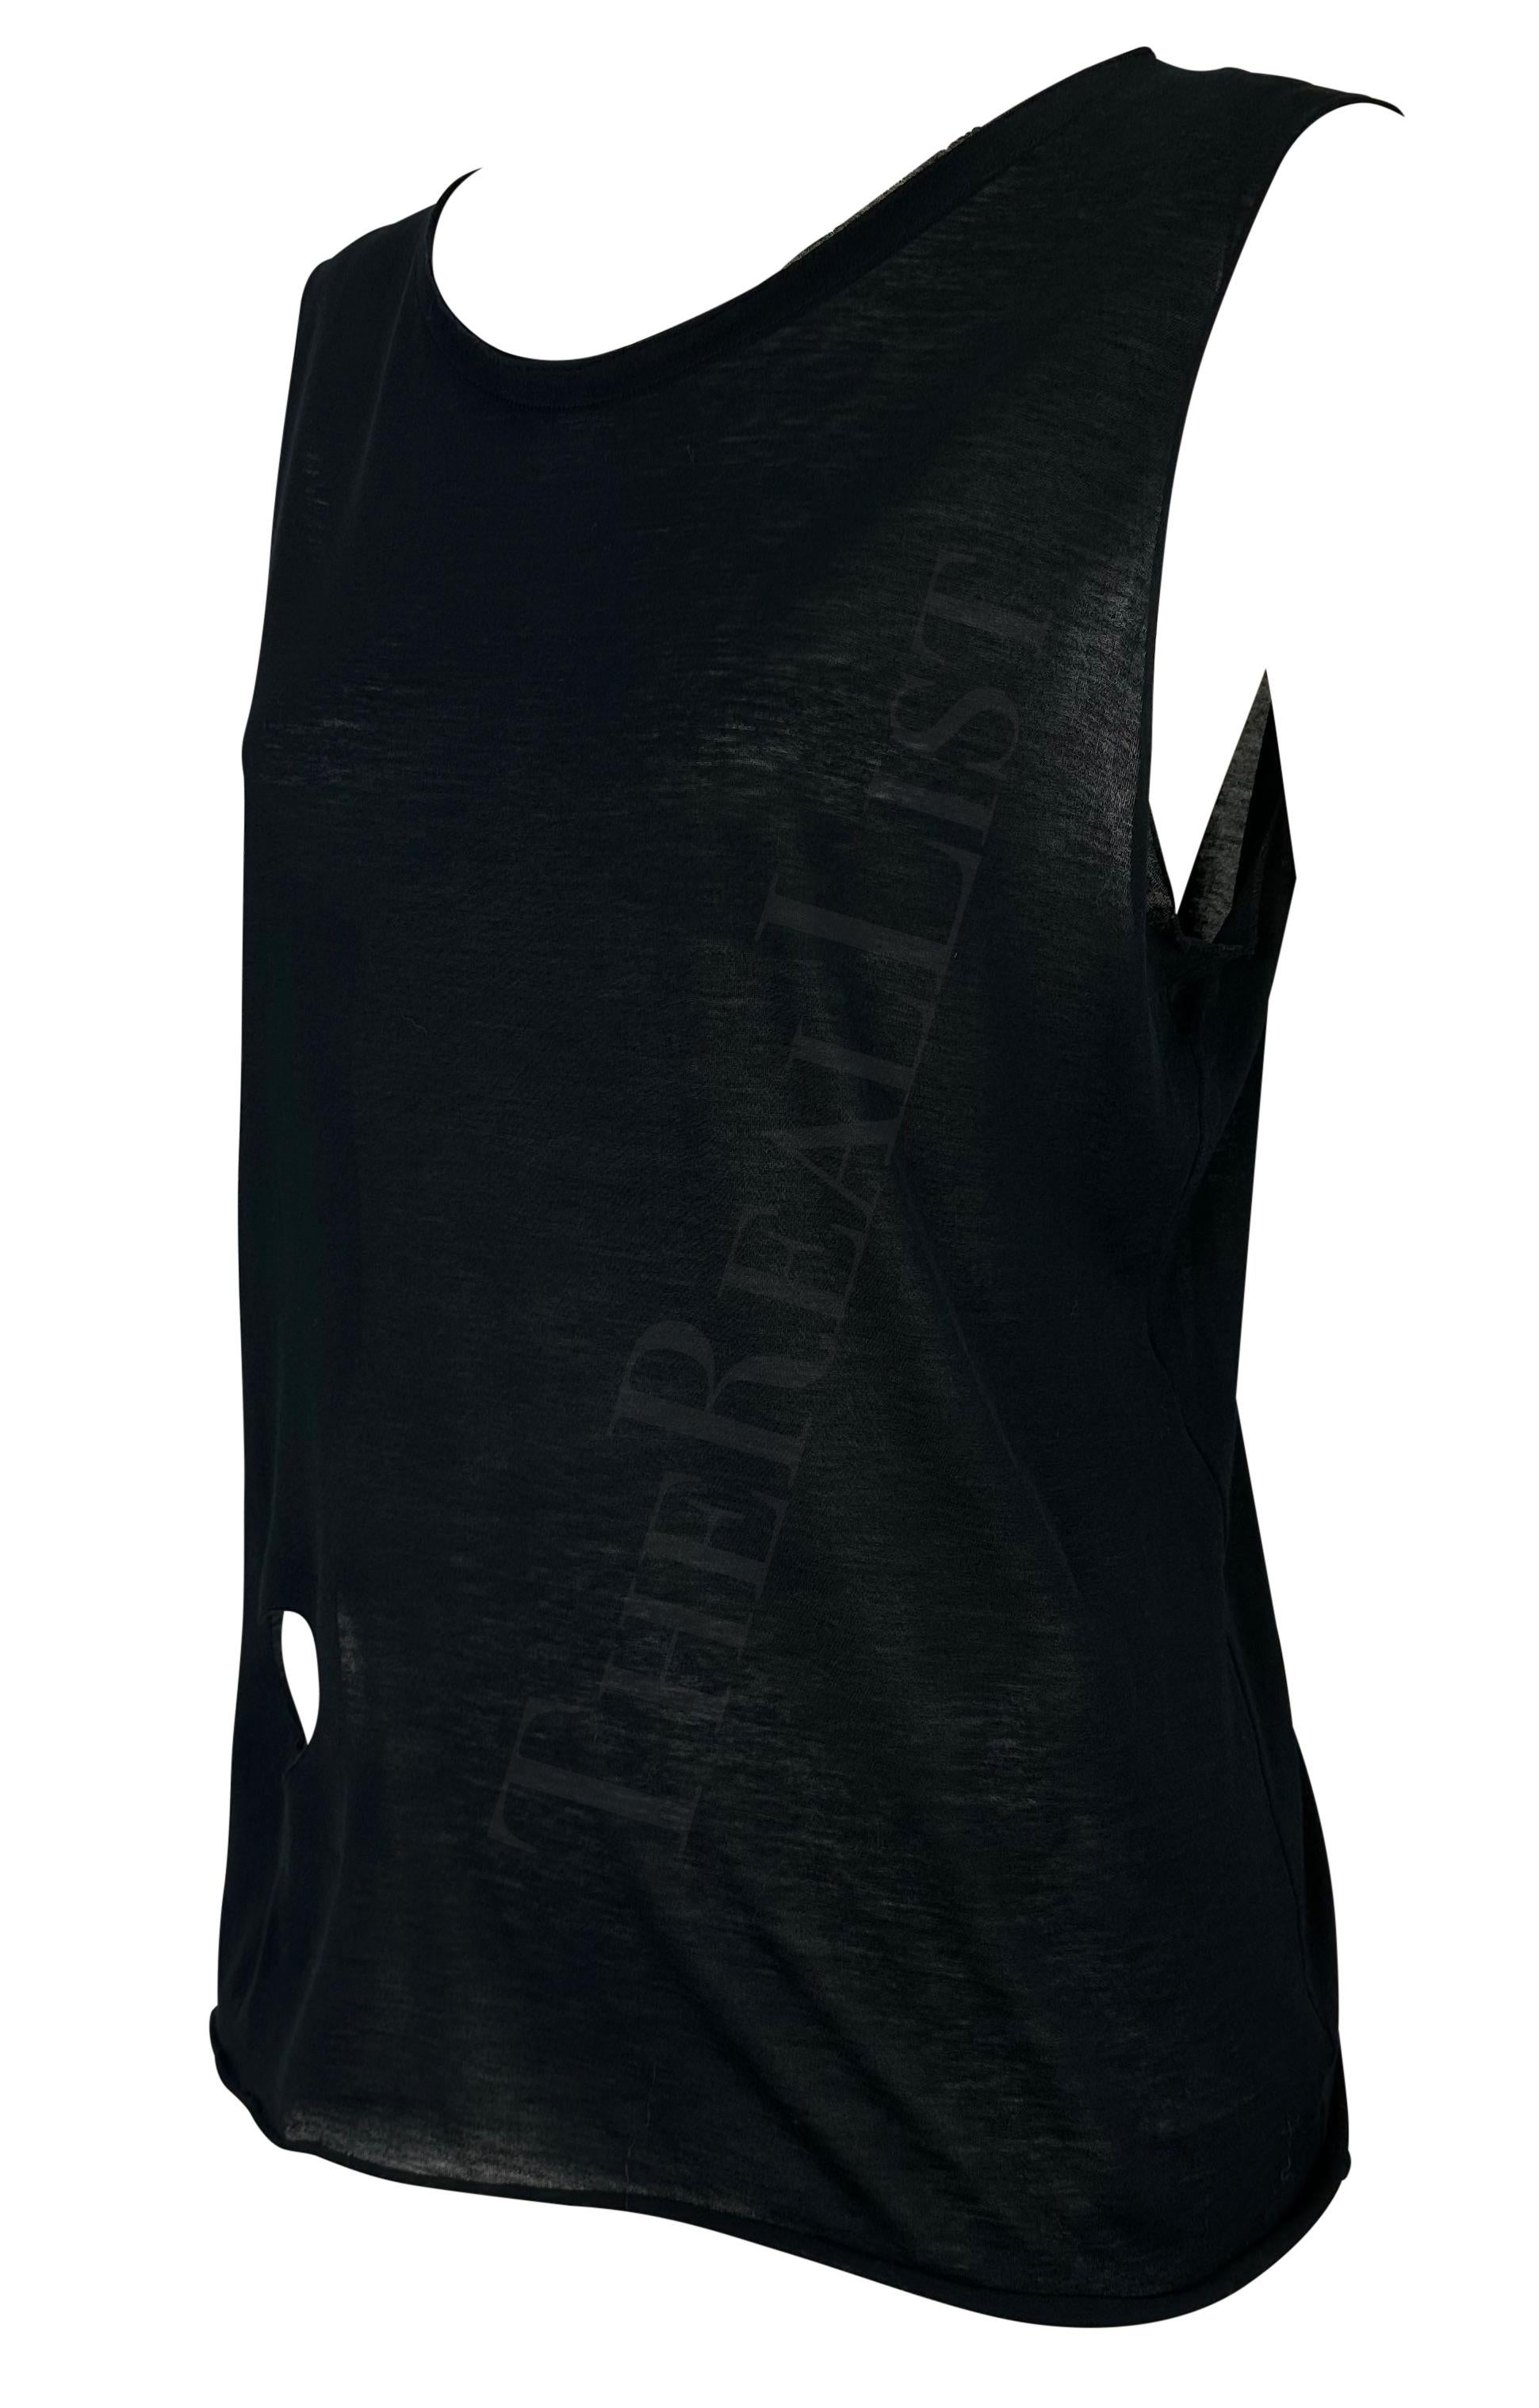 S/S 2002 Gucci by Tom Ford Runway Black Heart Cutout Sheer Stretch Cotton Shirt For Sale 5